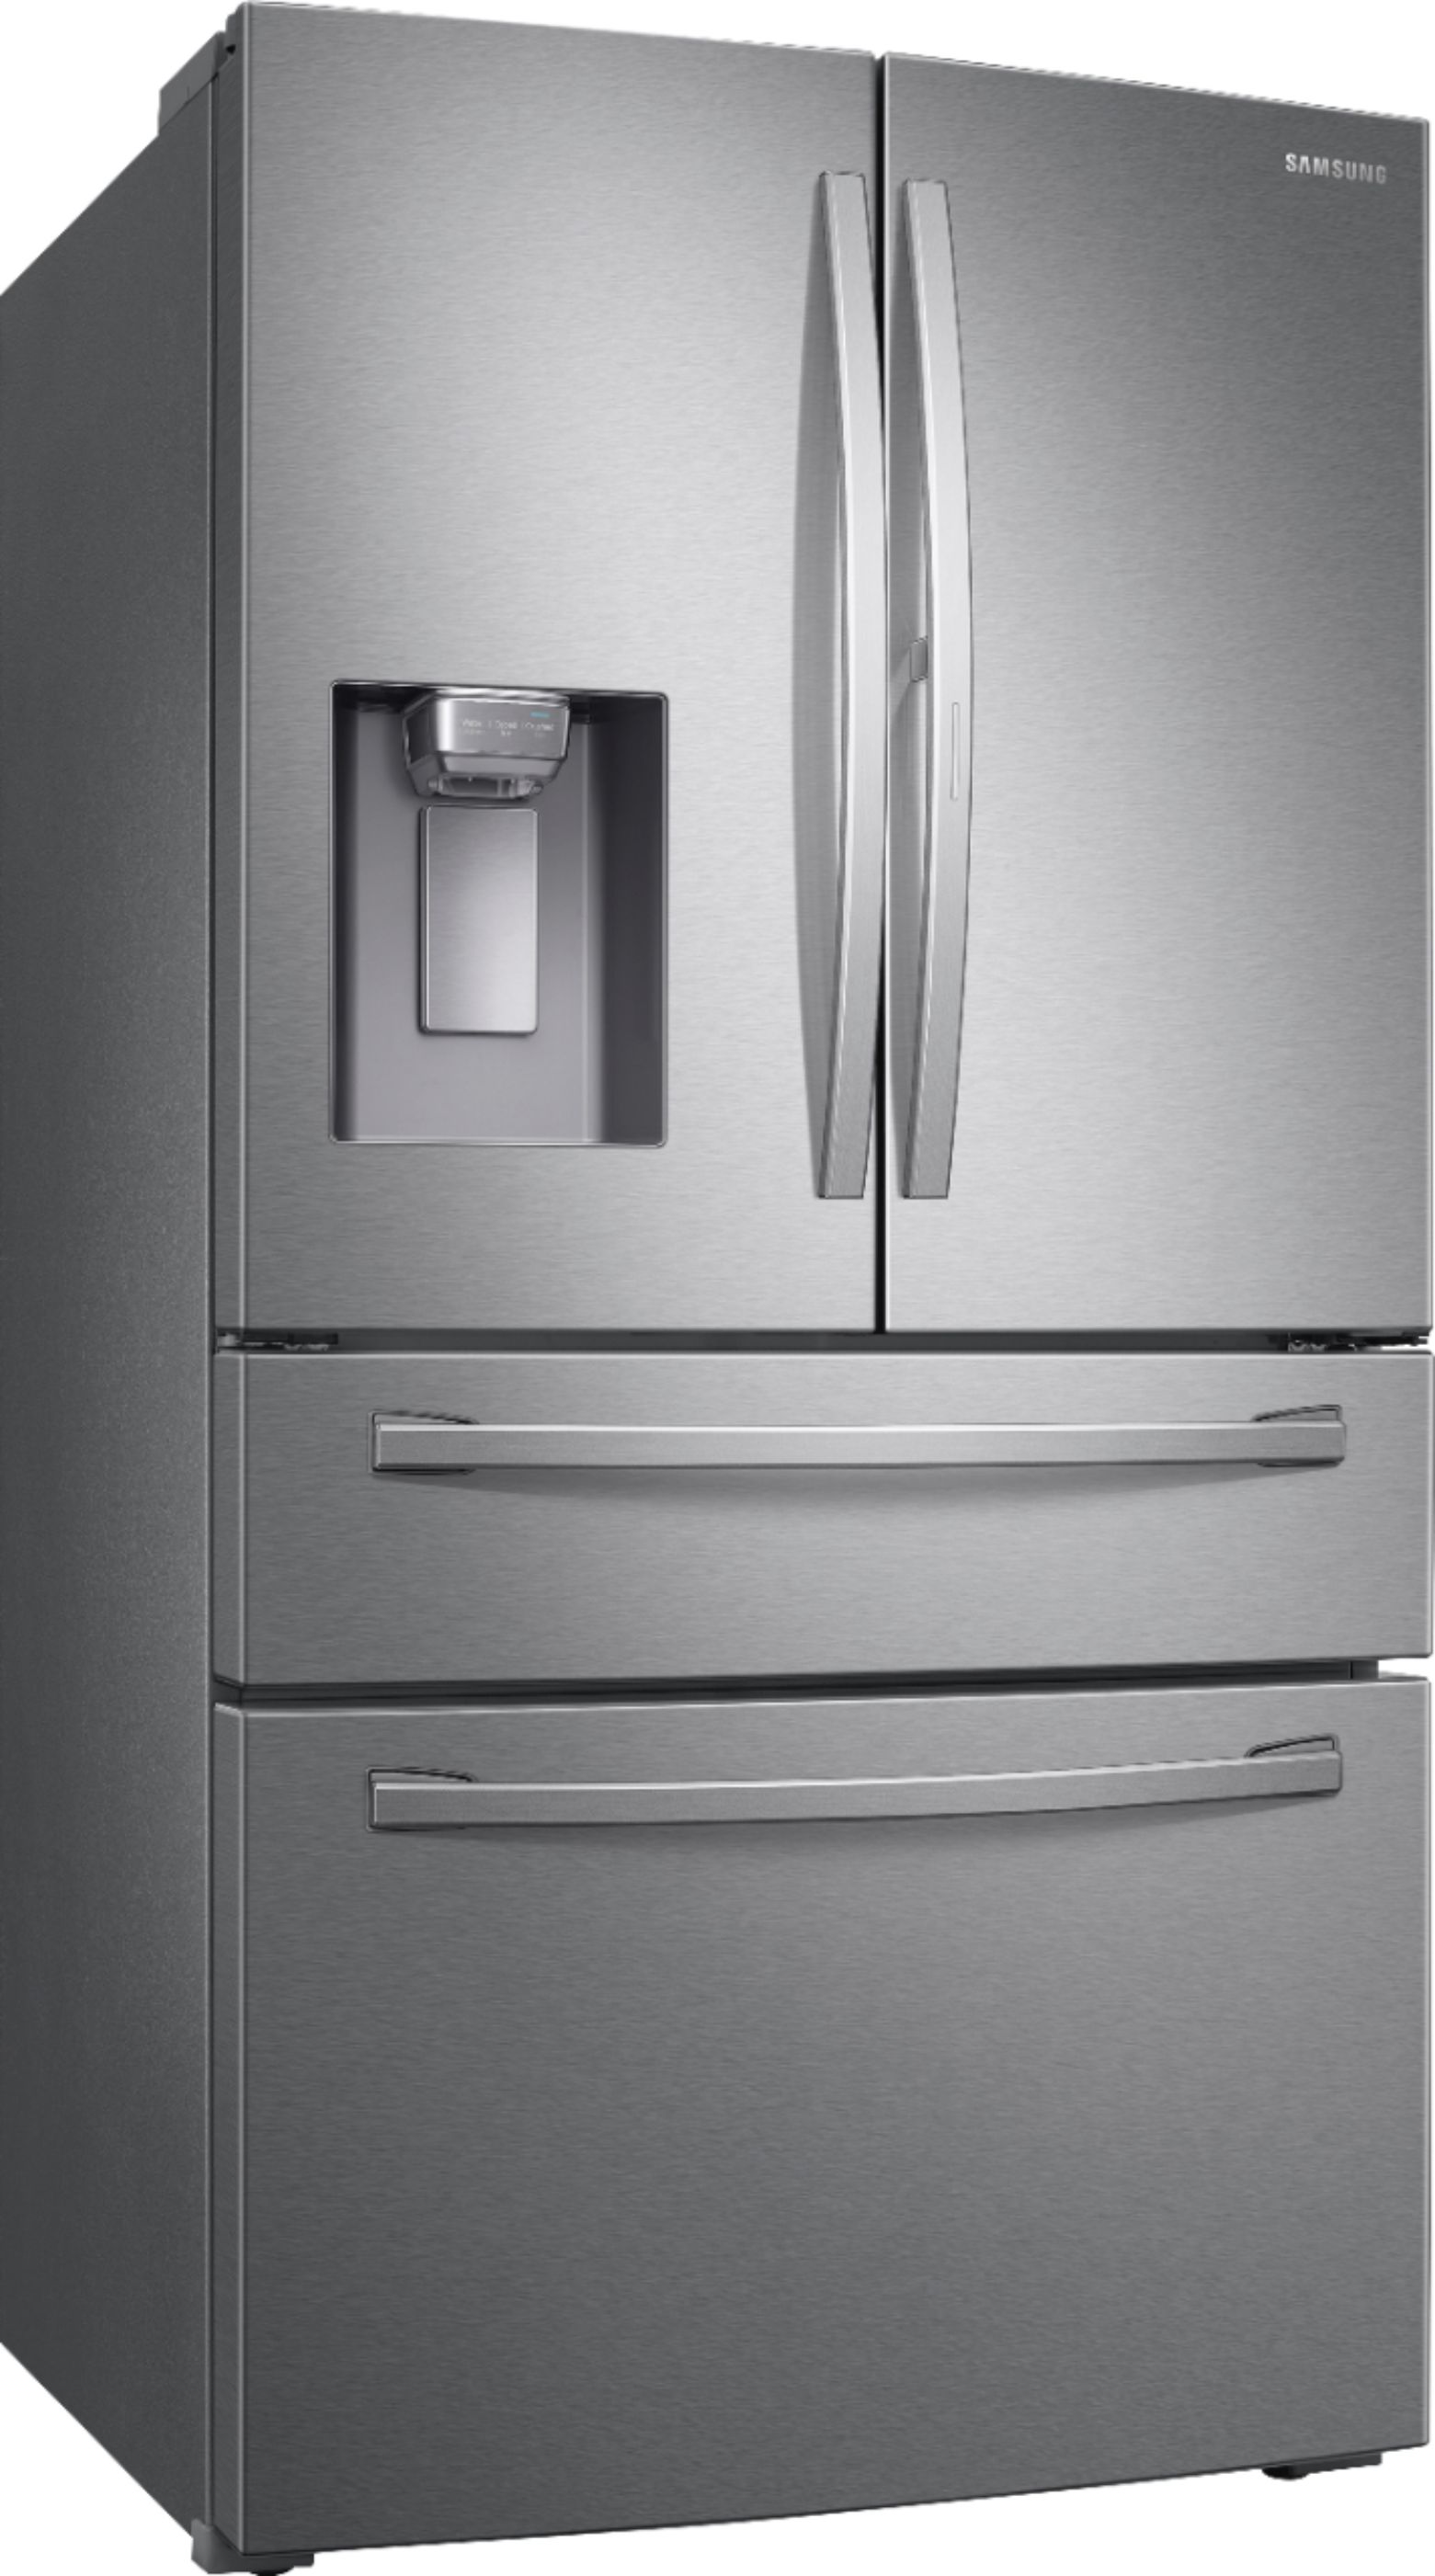 Angle View: Samsung - 22.4 cu. ft. 4-Door French Door Counter Depth Refrigerator with Food Showcase - Stainless steel